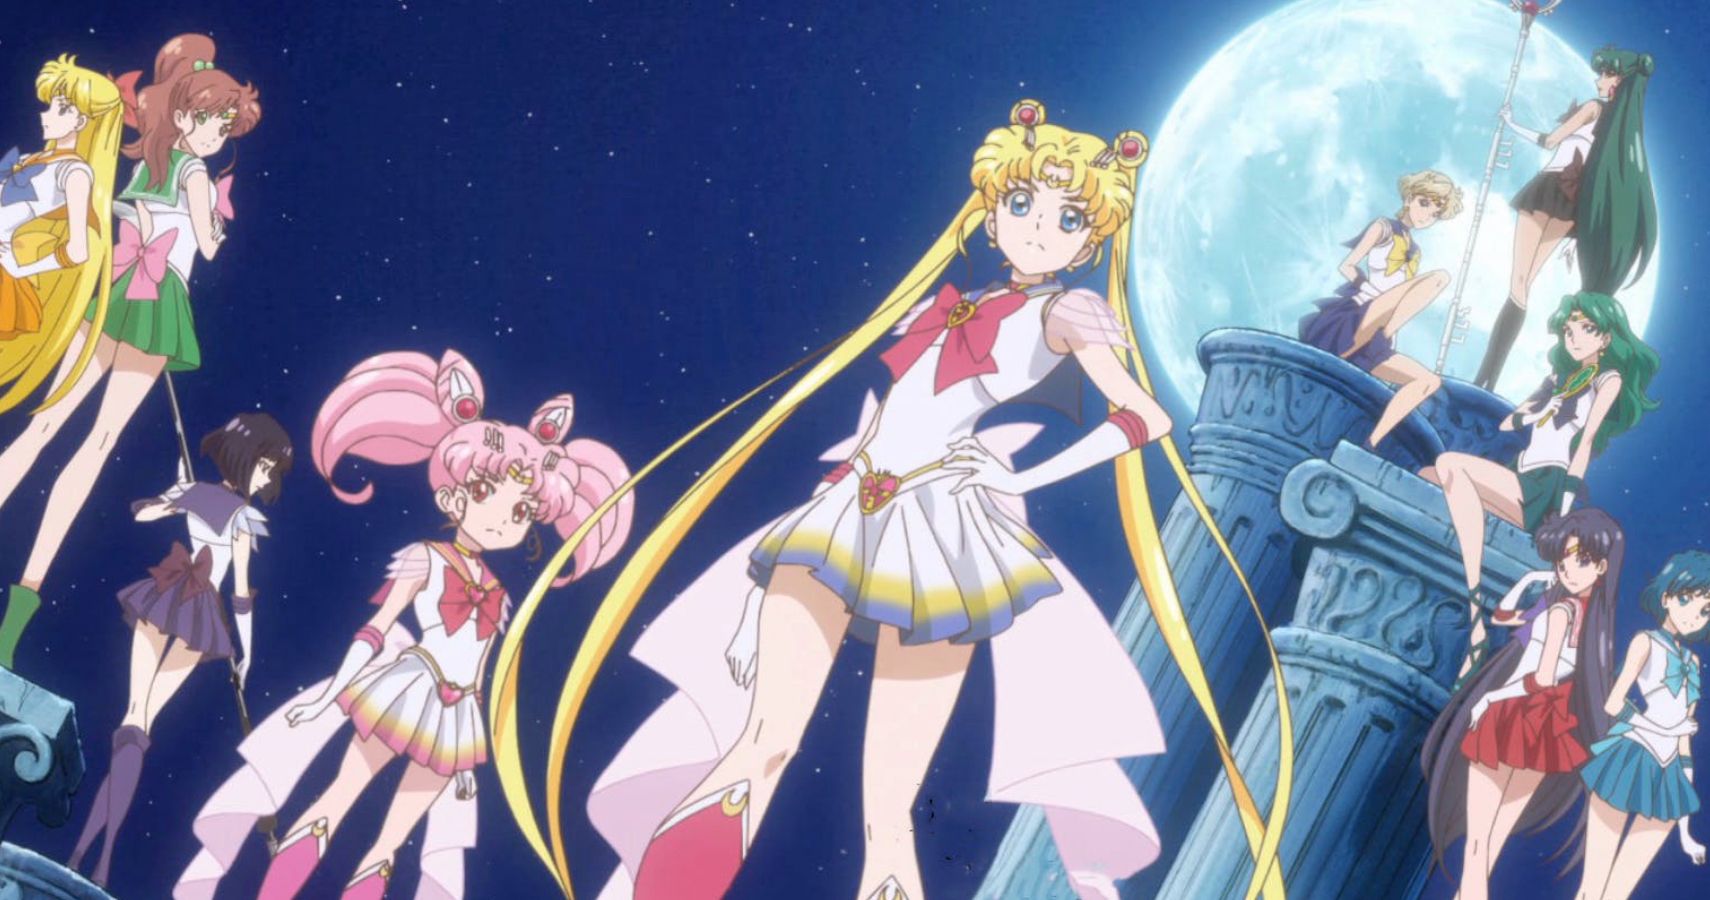 Sailor Moon Every Main Character Ranked By Intelligence See more ideas about sailor moon character, sailor moon, sailor. sailor moon every main character